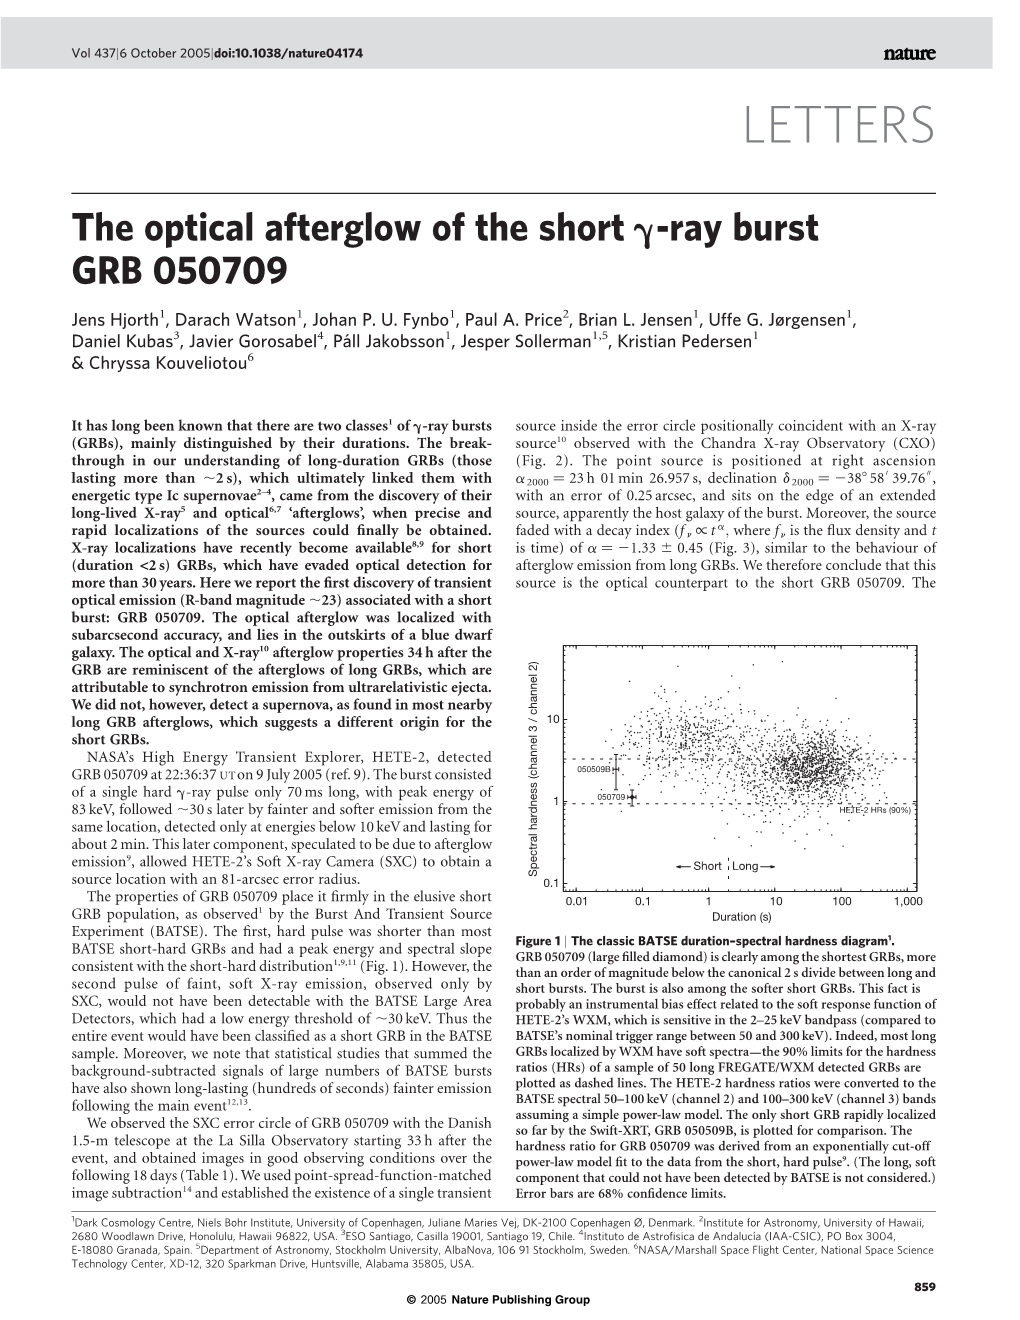 The Optical Afterglow of the Short G-Ray Burst GRB 050709